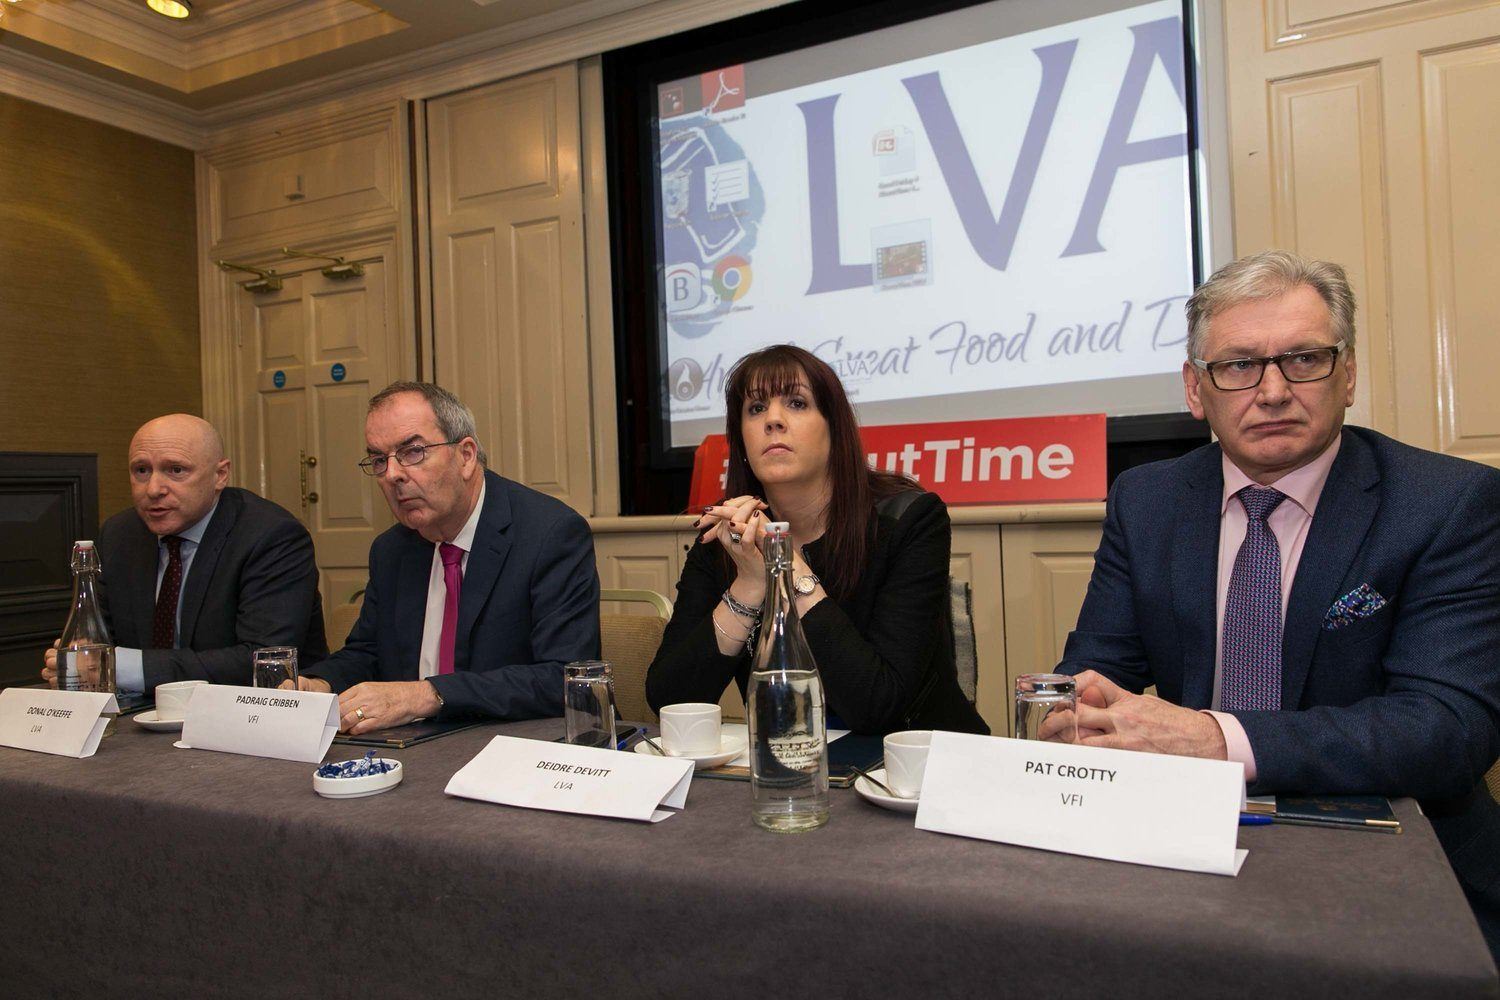 From left: LVA Chief Executive Donall O’Keeffe, VFI Chief Executive Padraig Cribben, LVA Chair Deirdre Devitt and VFI President Pat Crotty call on the Minister for Justice Frances Fitzgerald to introduce the necessary legislation in time for Easter 2017 and to avoid further procrastination by deferring it to the Sale of Alcohol Bill.